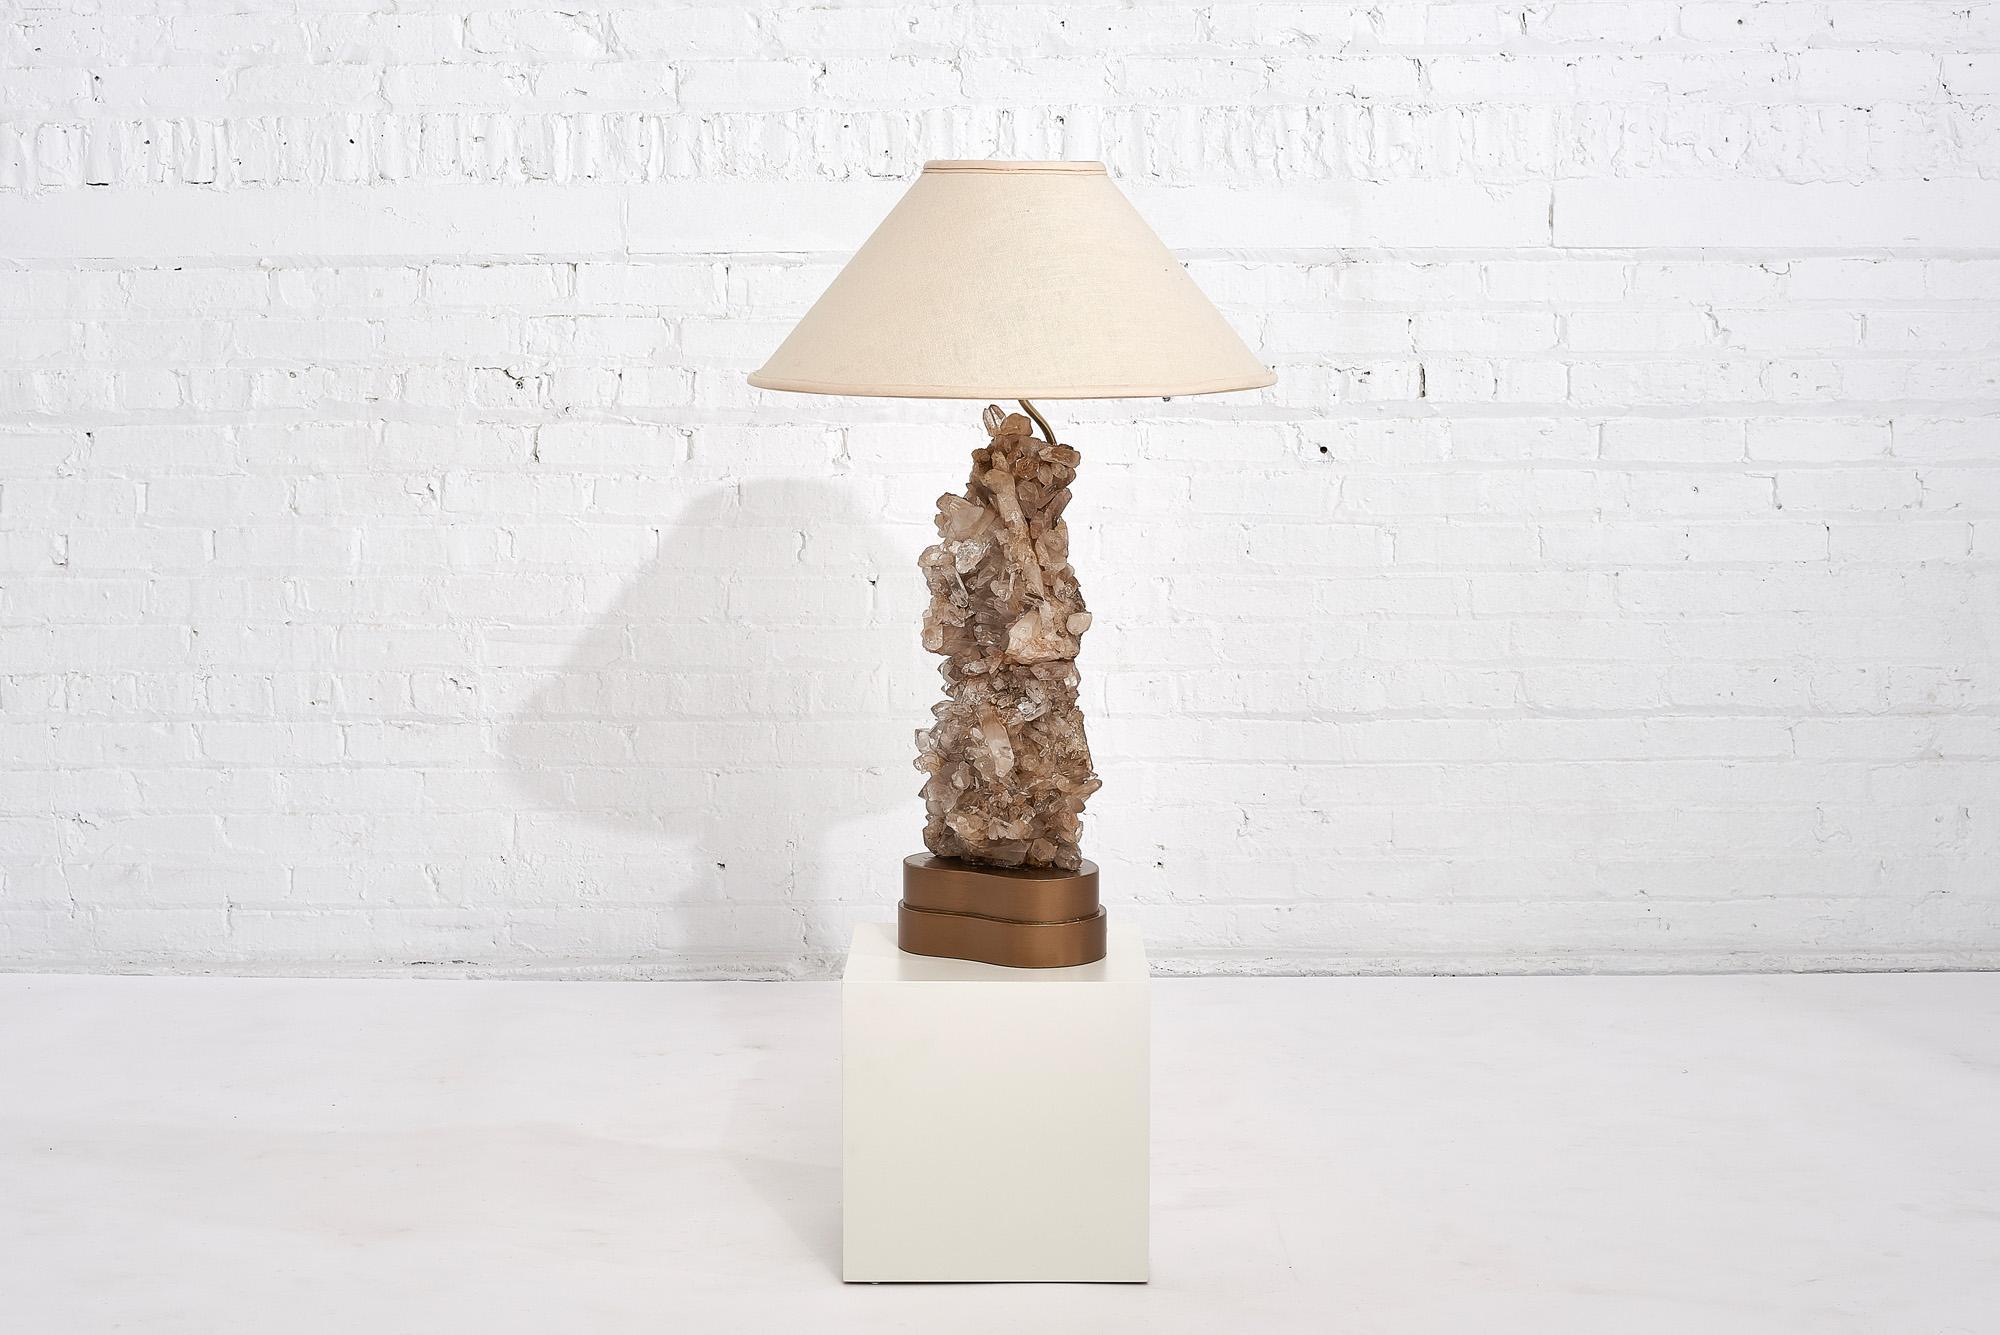 Carole Stupell quartz table lamp, circa 1950. Lamp is mounted on a gold gilded wood base.